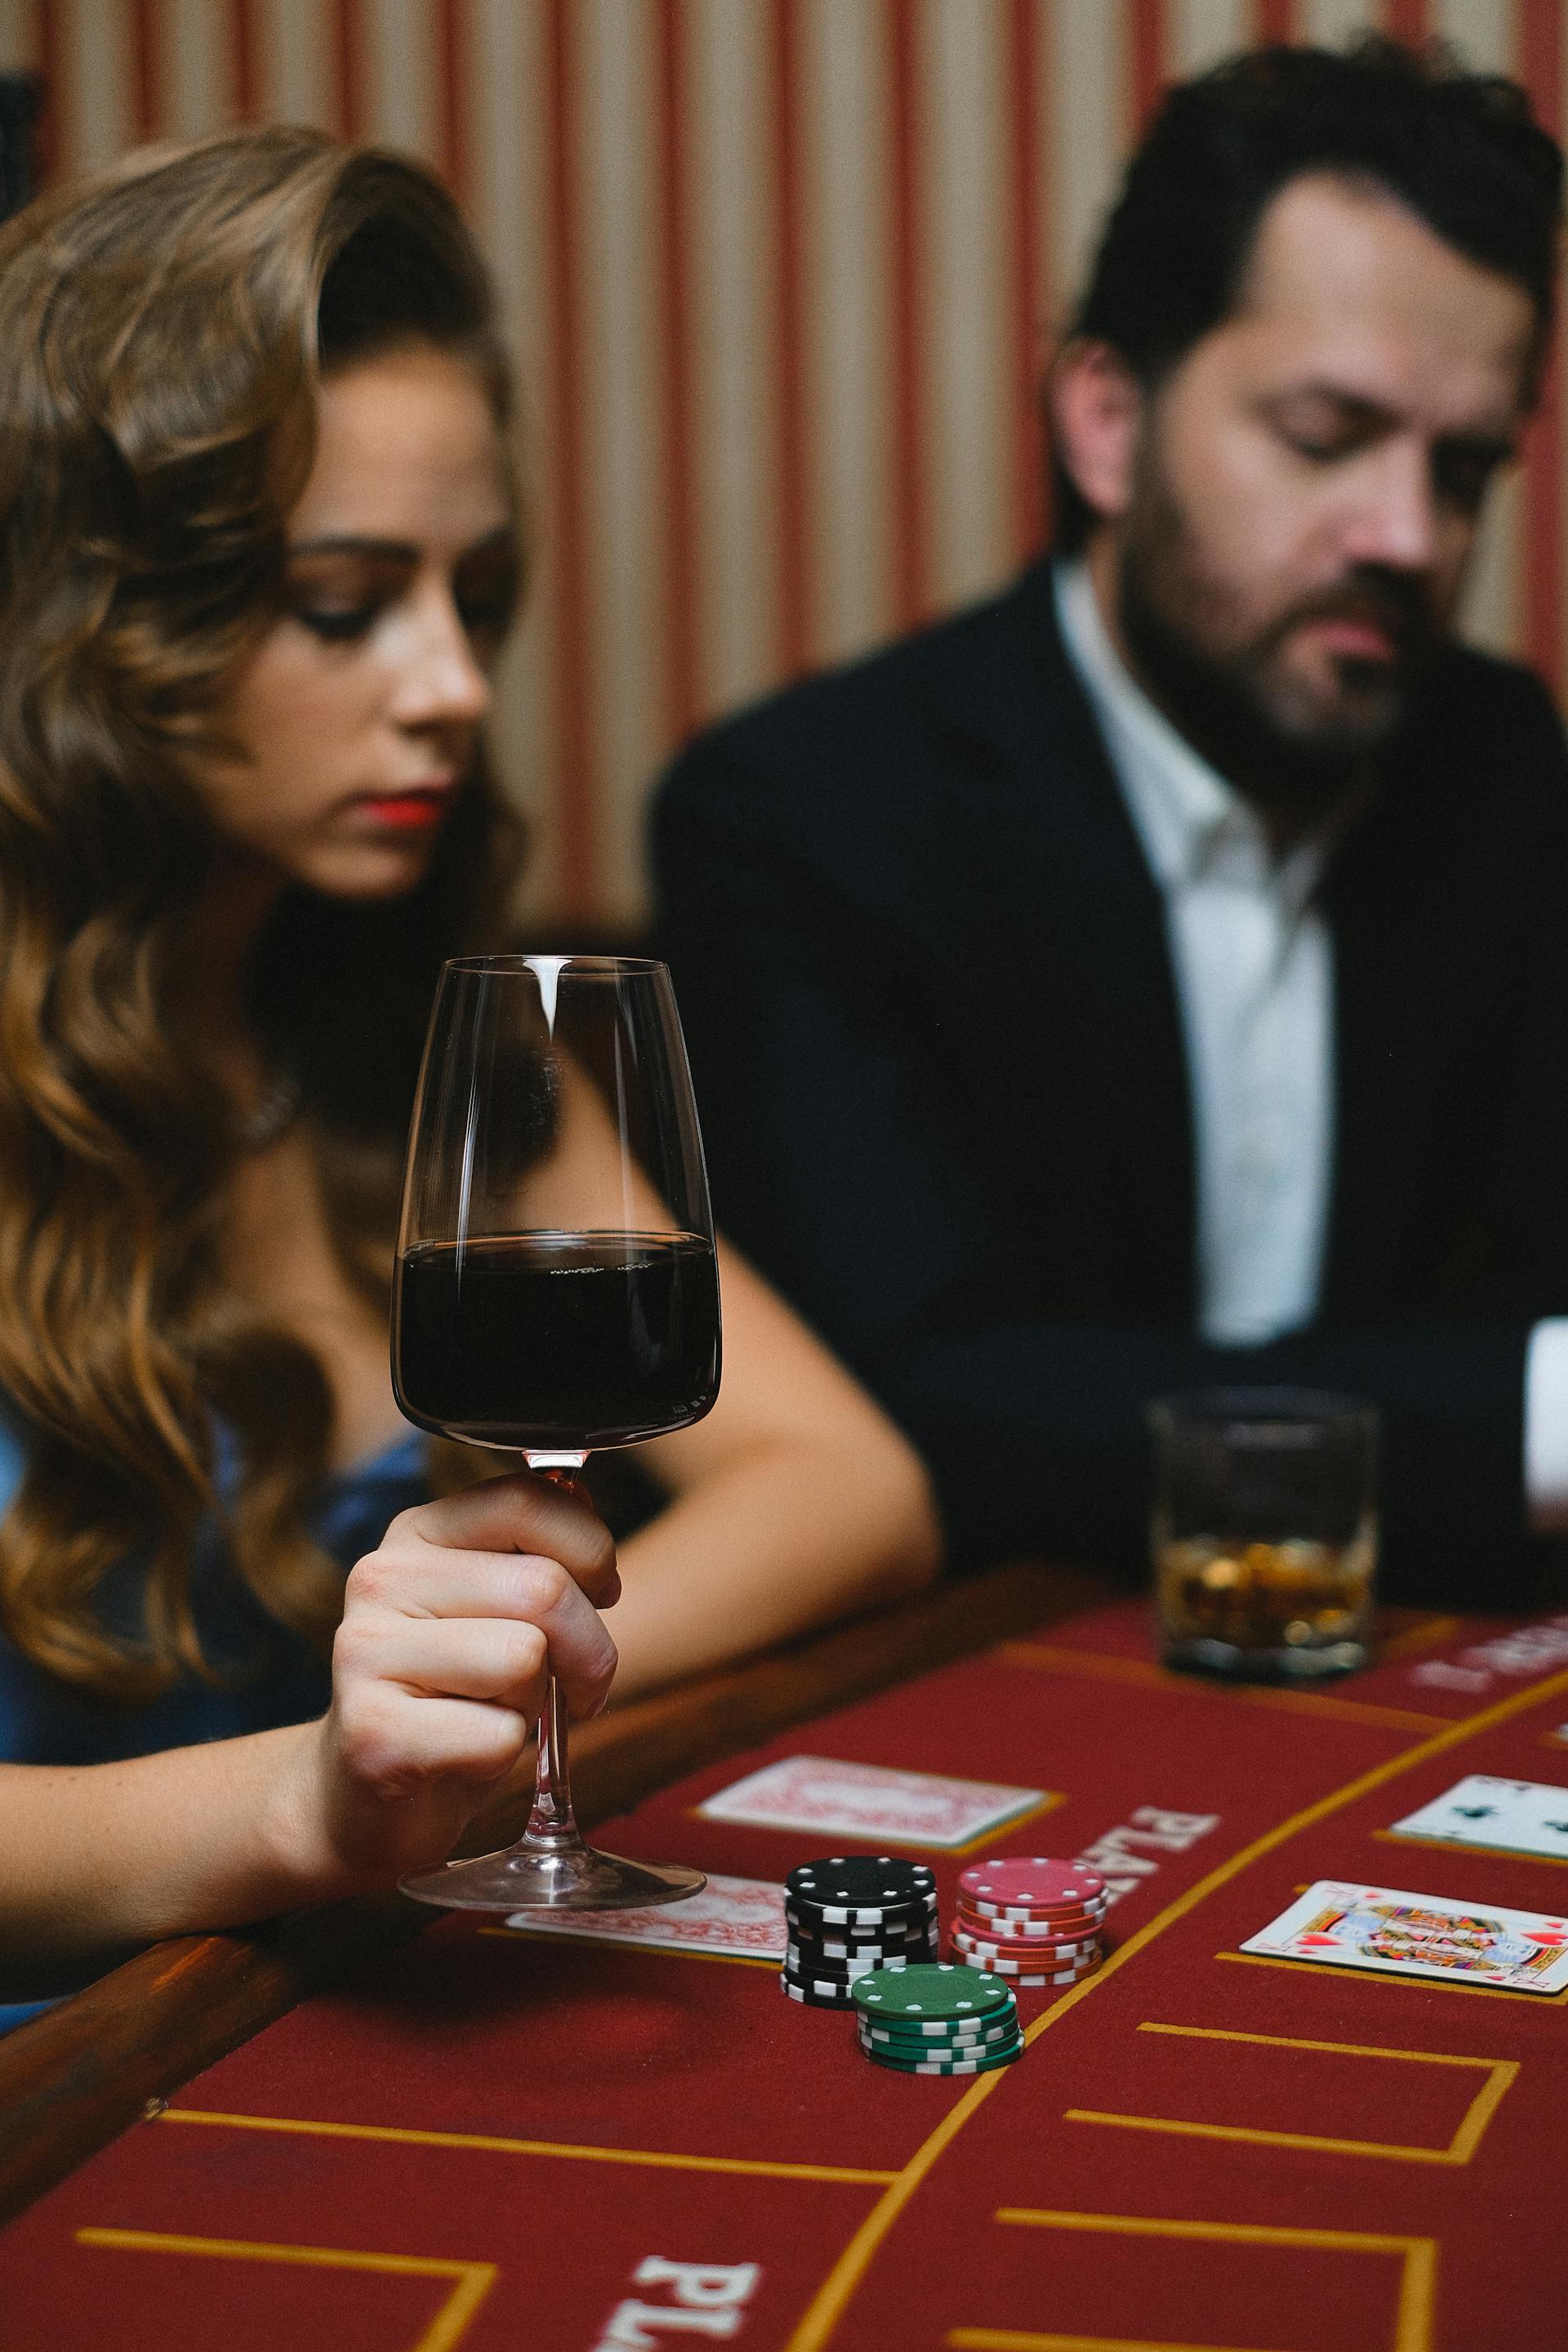 A couple playing poker | Source: Pexels